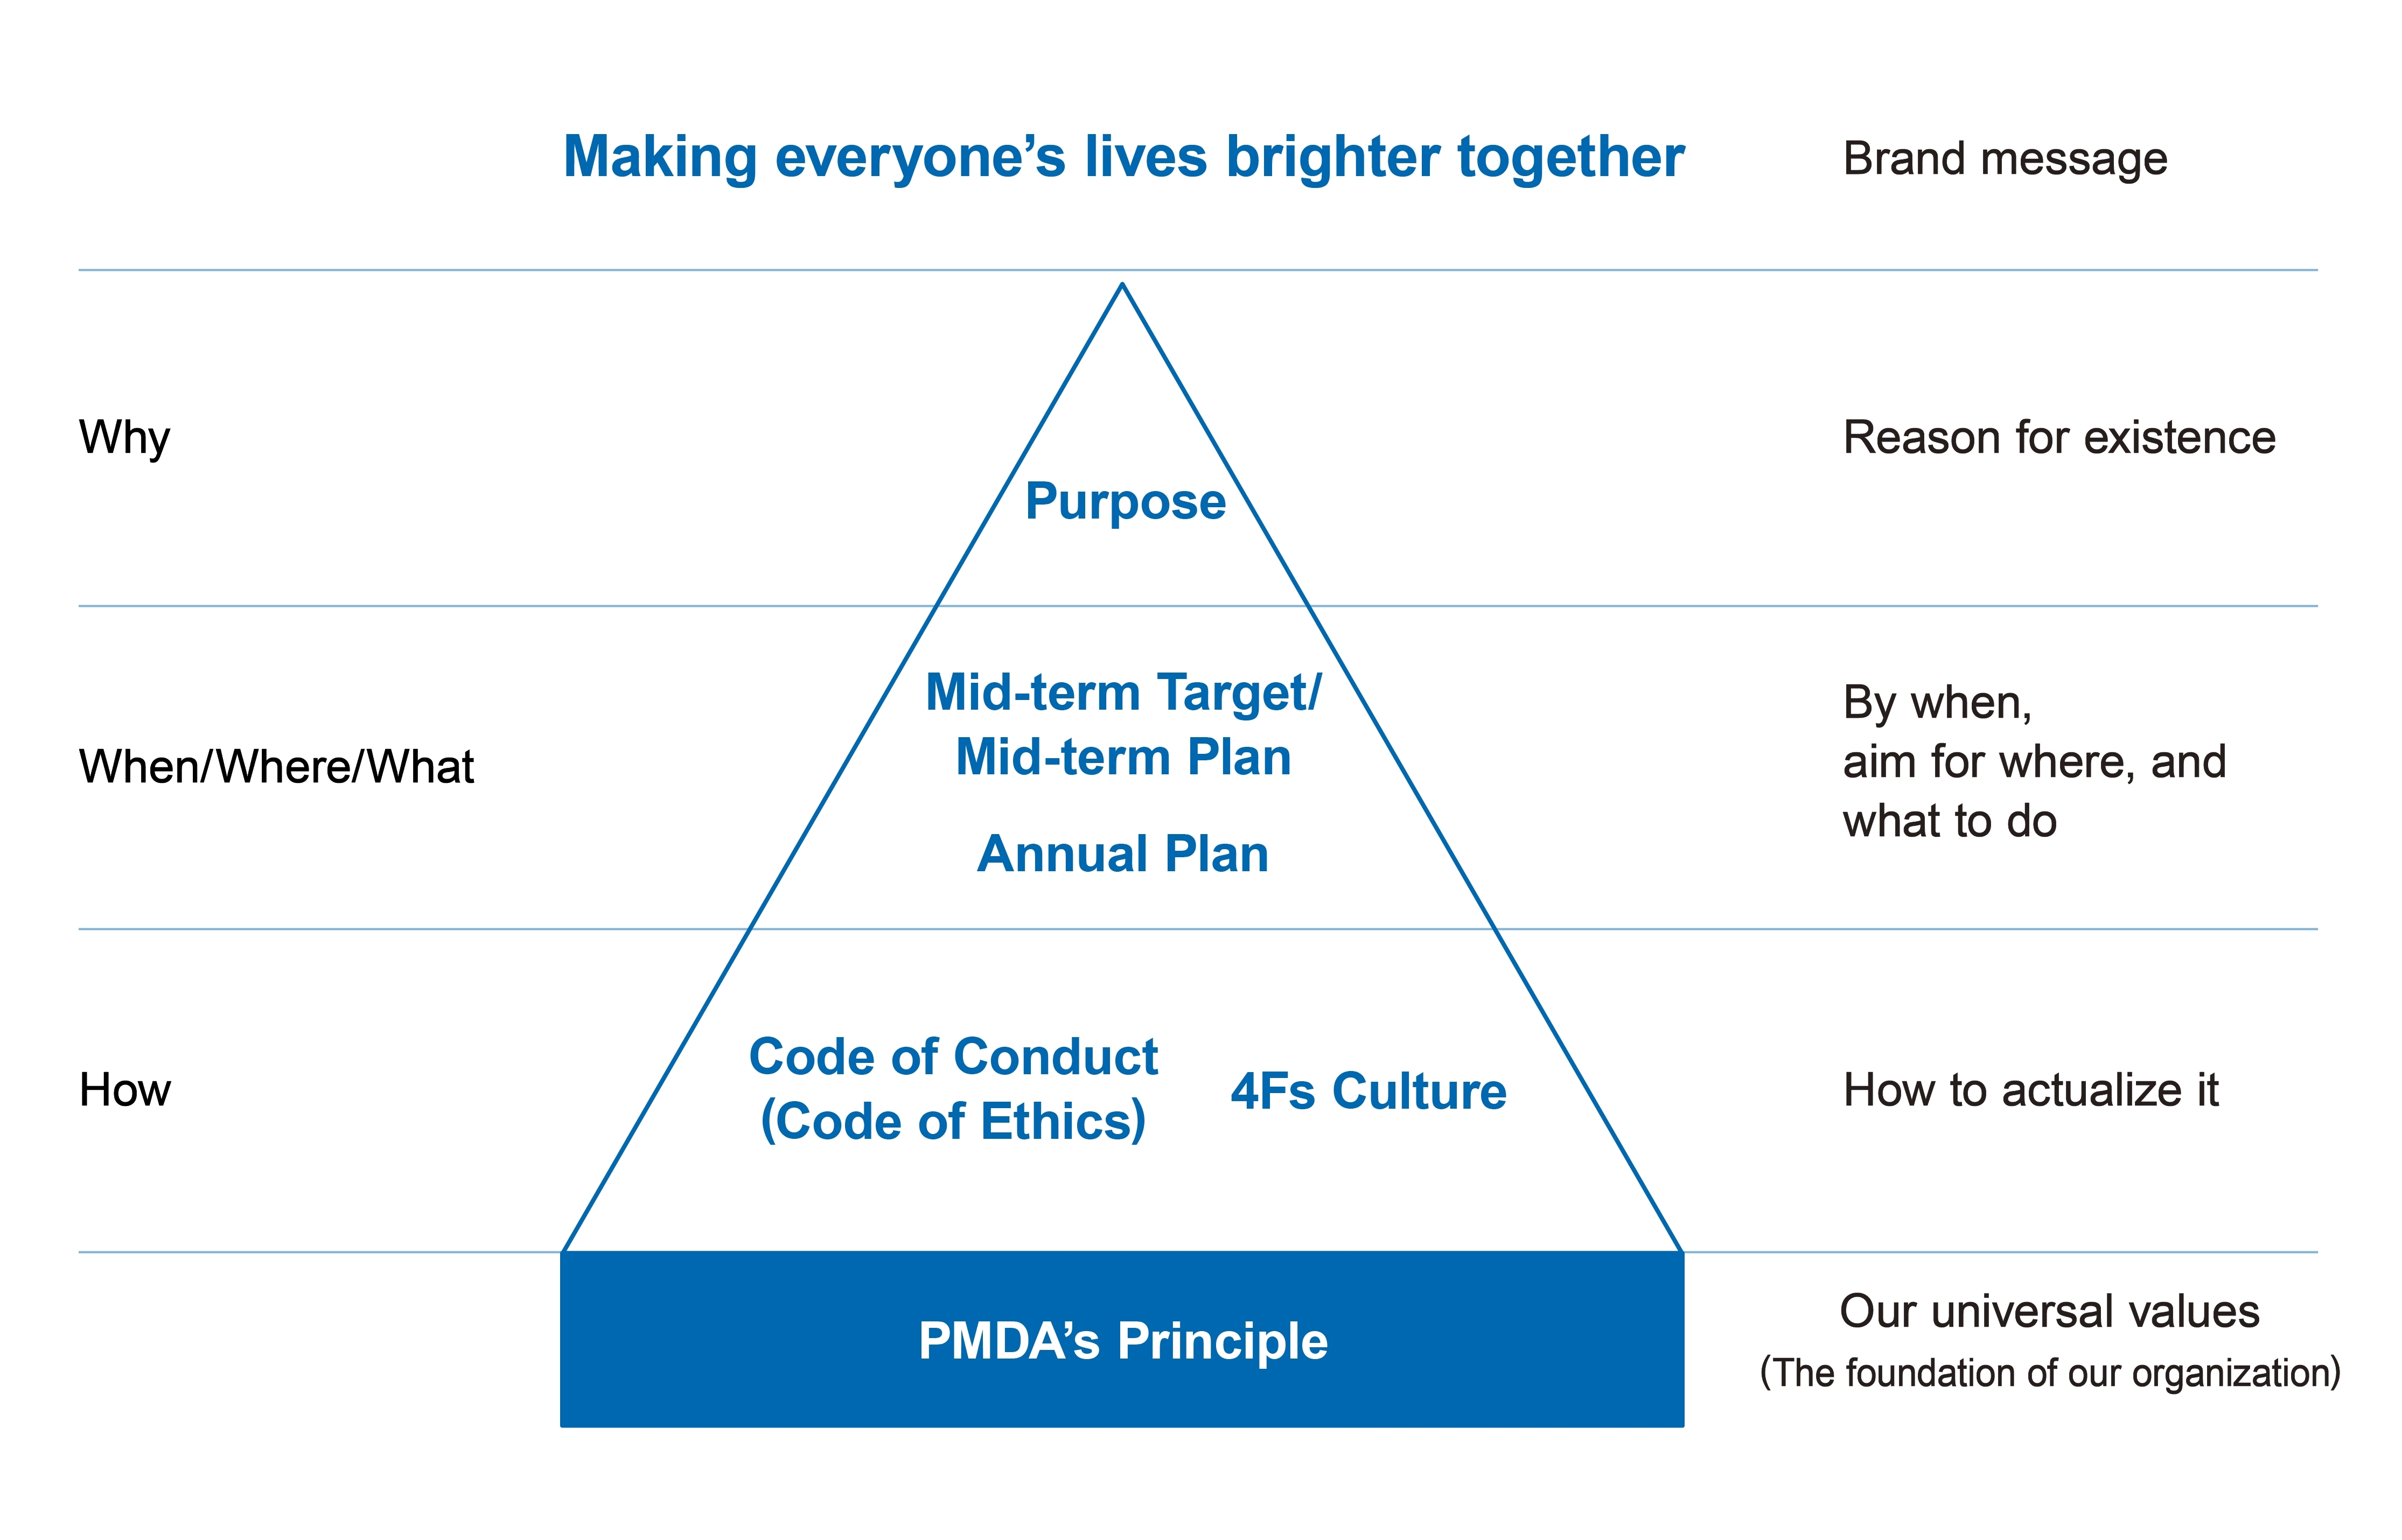 This is an image of the PMDA Philosophy. It shows the relationship between the principles and the purpose, etc. When clicking it, the PDF file opens.